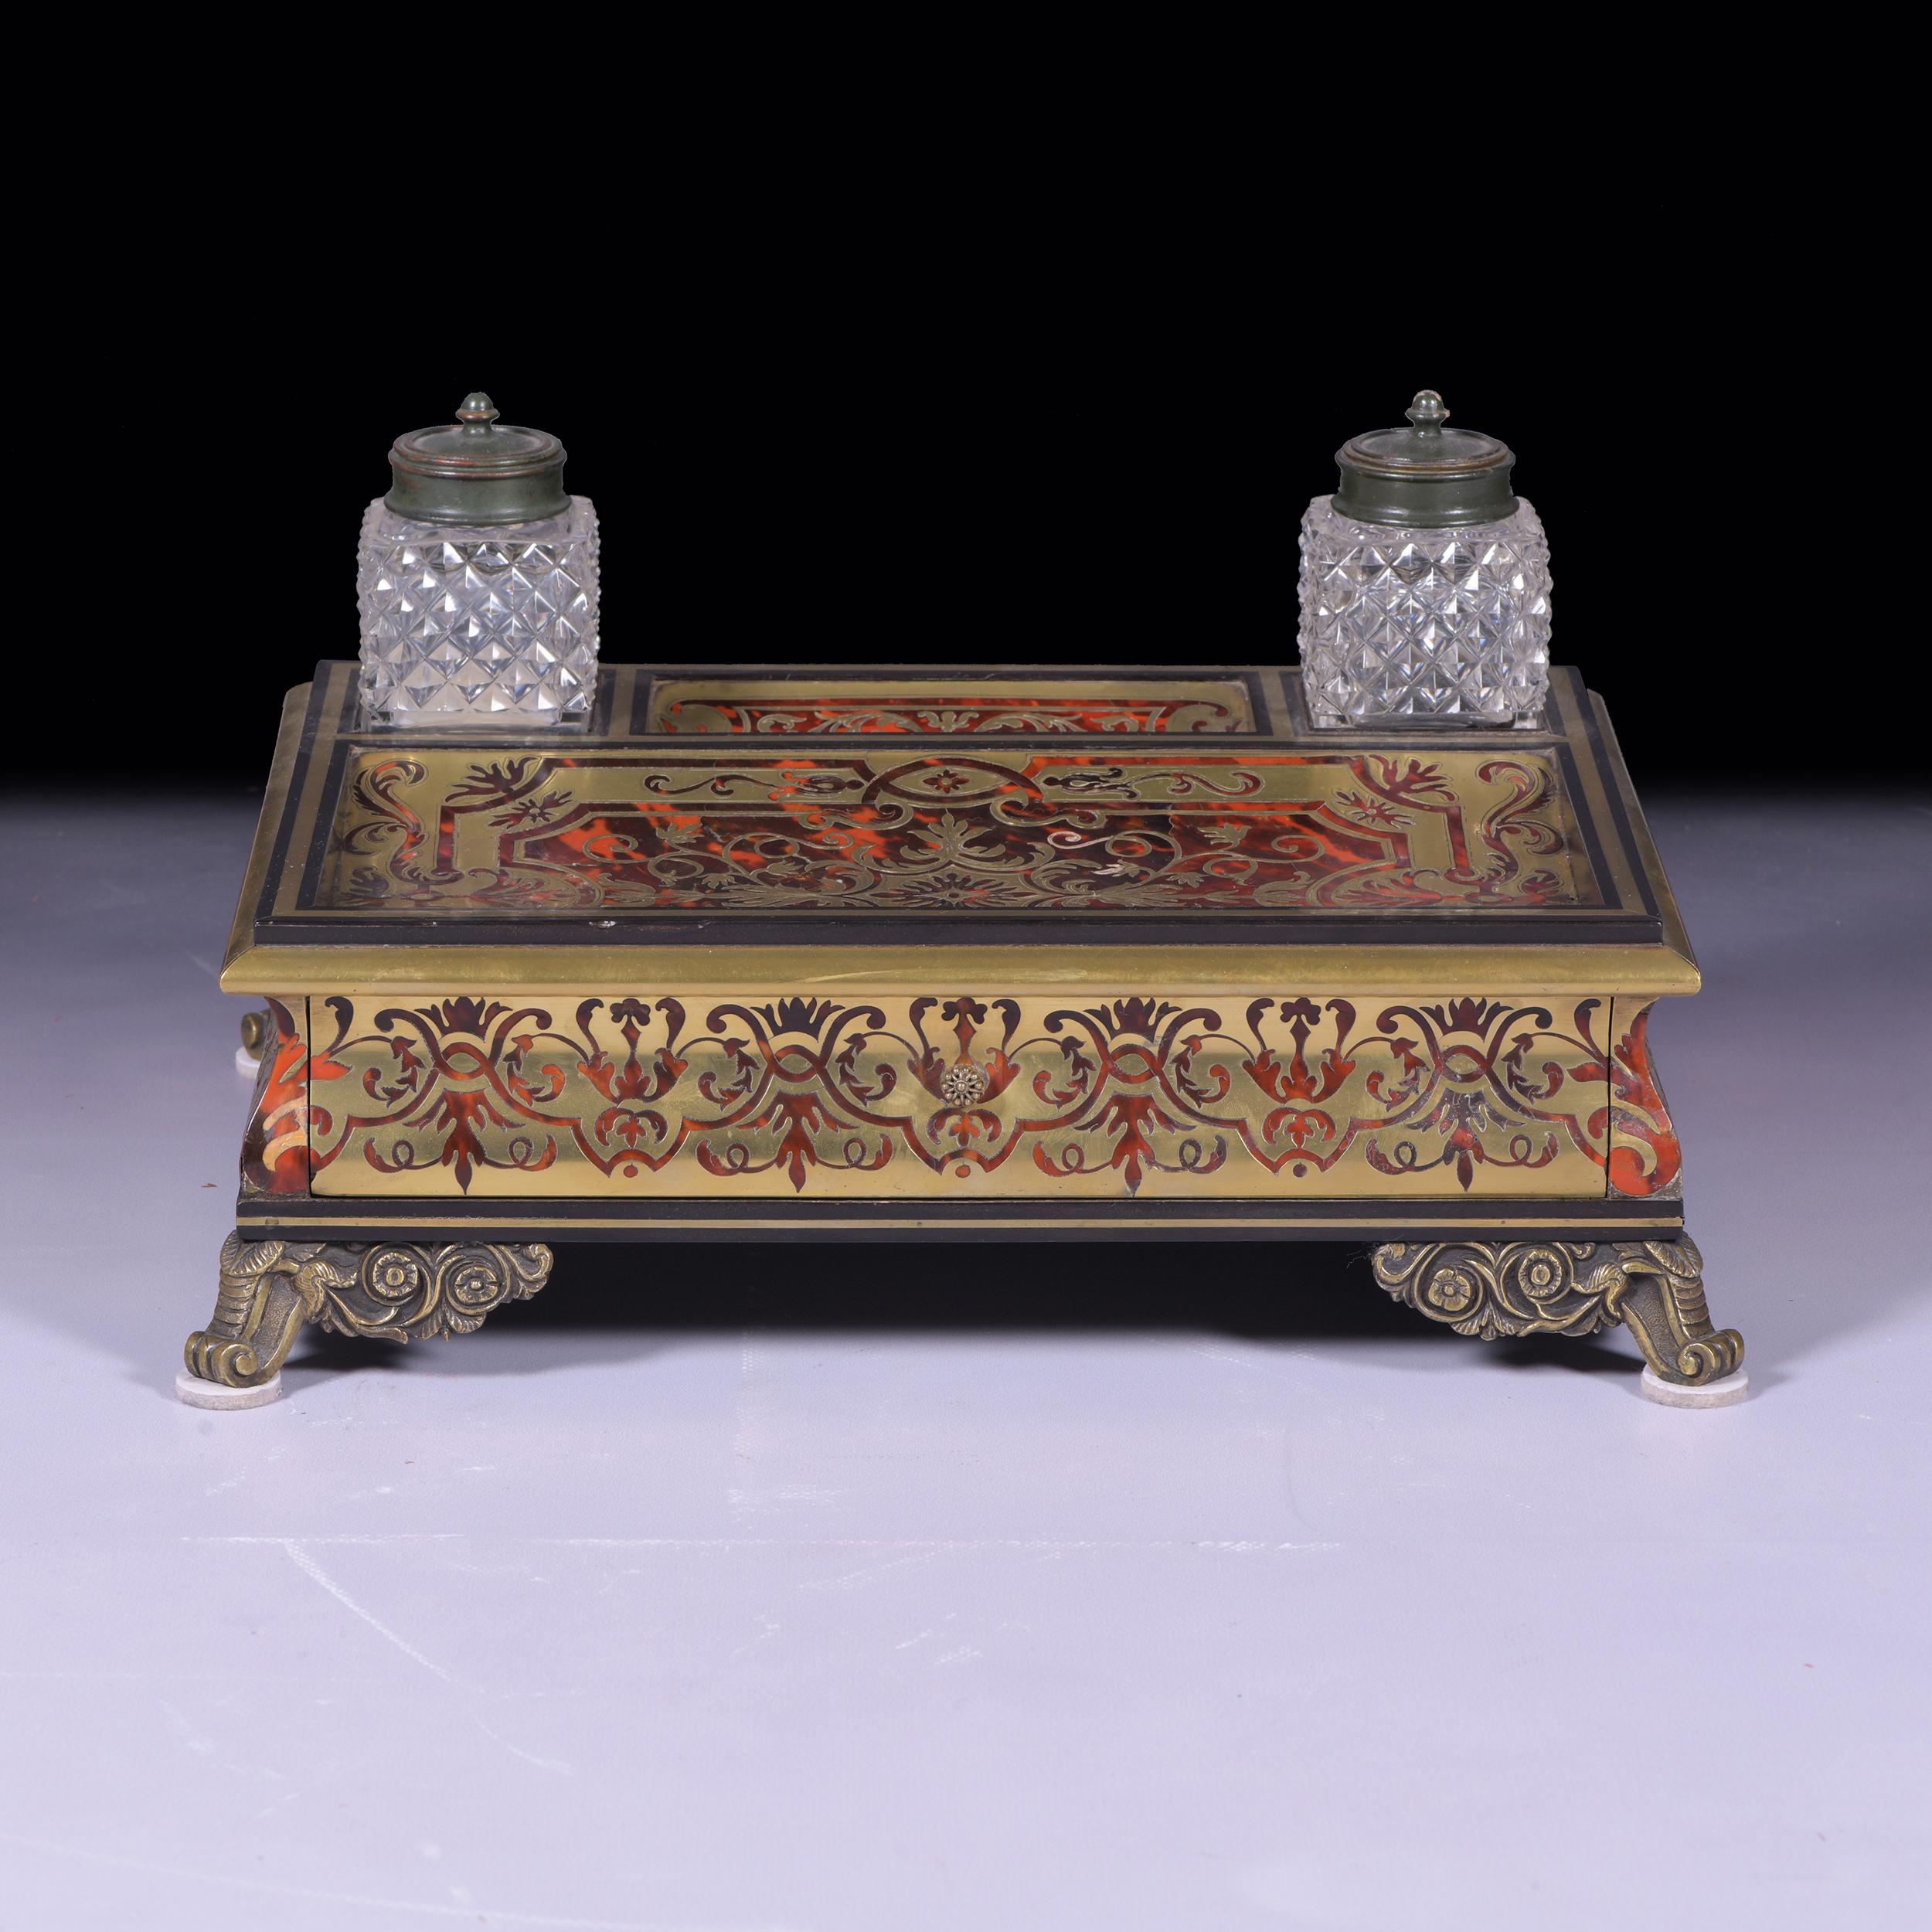 An exceptional 19th century Boulle work inkwell, of rectangular form, fitted with two cut glass ink wells and covers, with dished pen tray, decorated with cut brass arabesques above a long frieze stationary drawer on cast ormolu feet.

Circa